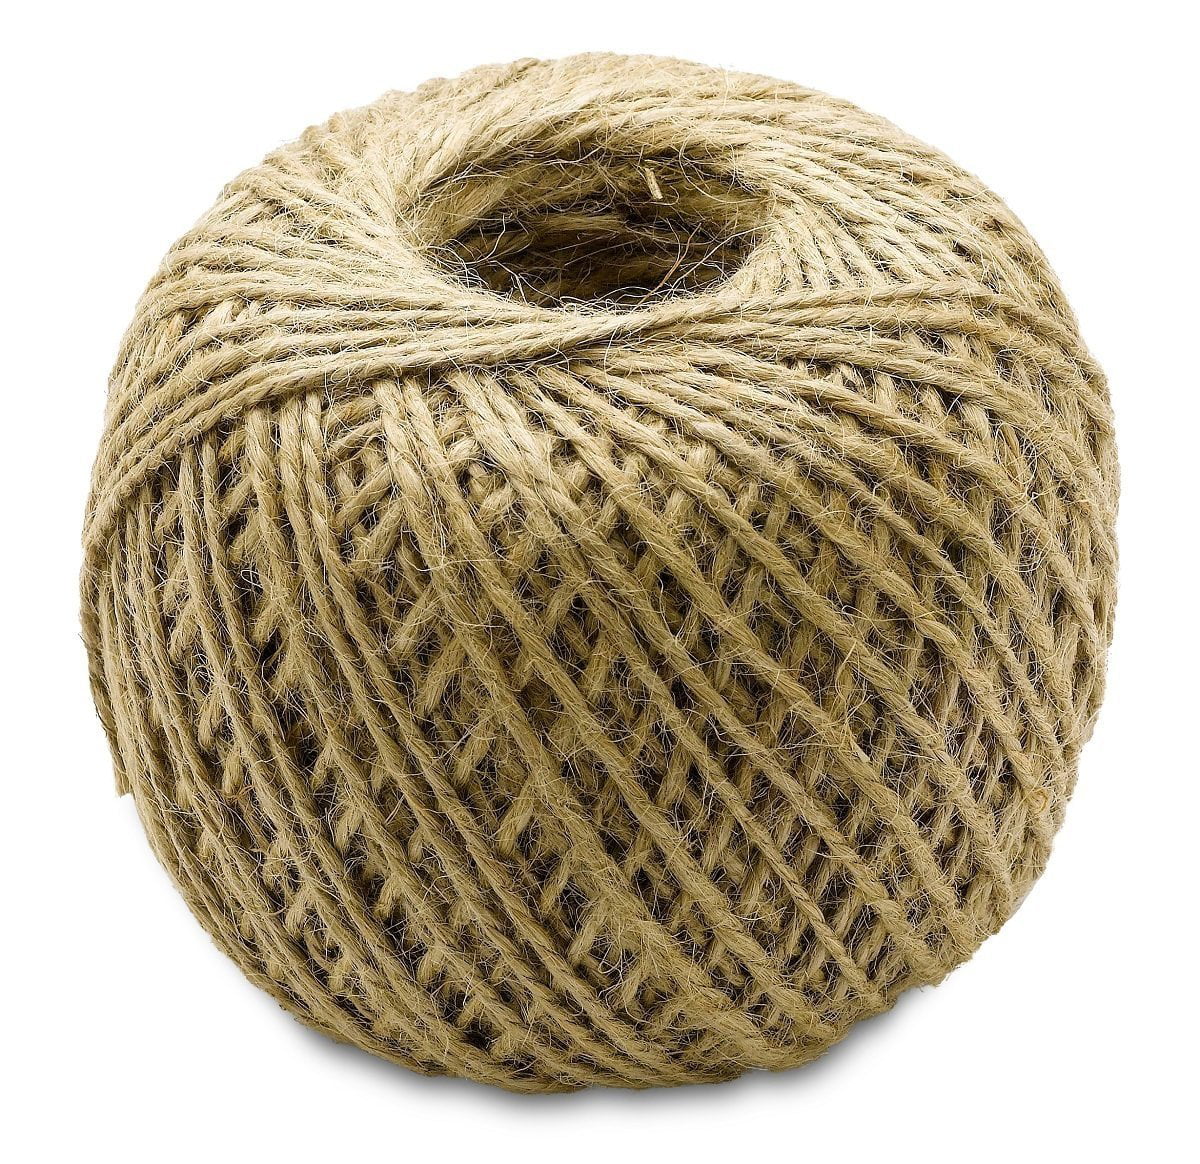 4mm Thick 66 Feet Long Jute String Rope Roll for Strong Natural Jute Twine